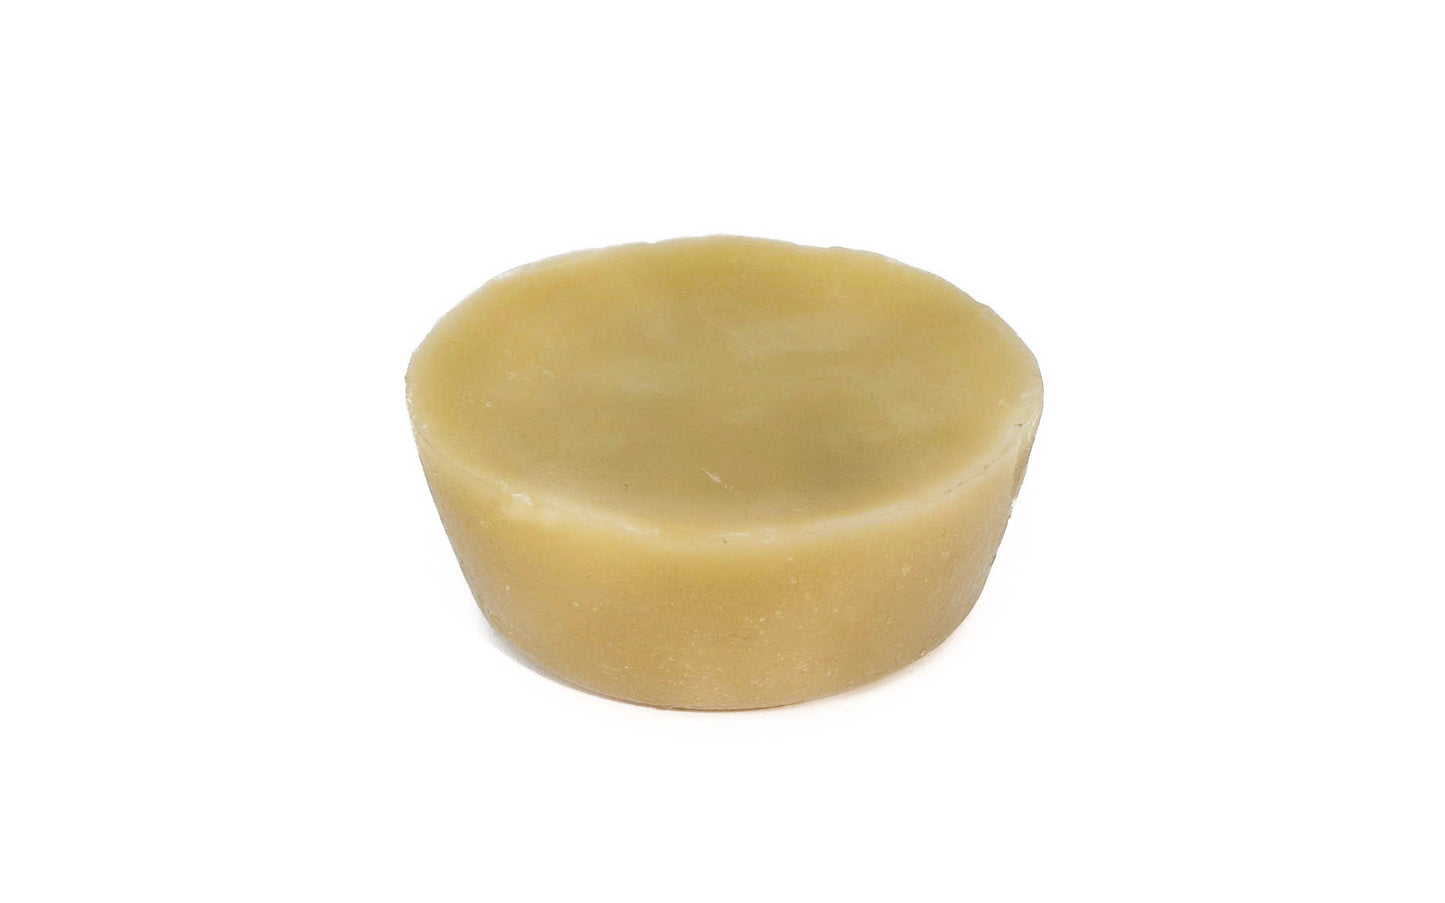 2 oz Round Beeswax Cake ~ Made in USA · Made of natural beeswax ~ Long lasting lubricant Pleasant light scent ~ For use in many innumerable applications ~ Available in 2 oz. & 1 lb brick - 100% beeswax - natural - Beeswax Discs - Beeswax Pucks - 2 oz Beeswax - no additives - natural beeswax - pure beeswax - lubricant